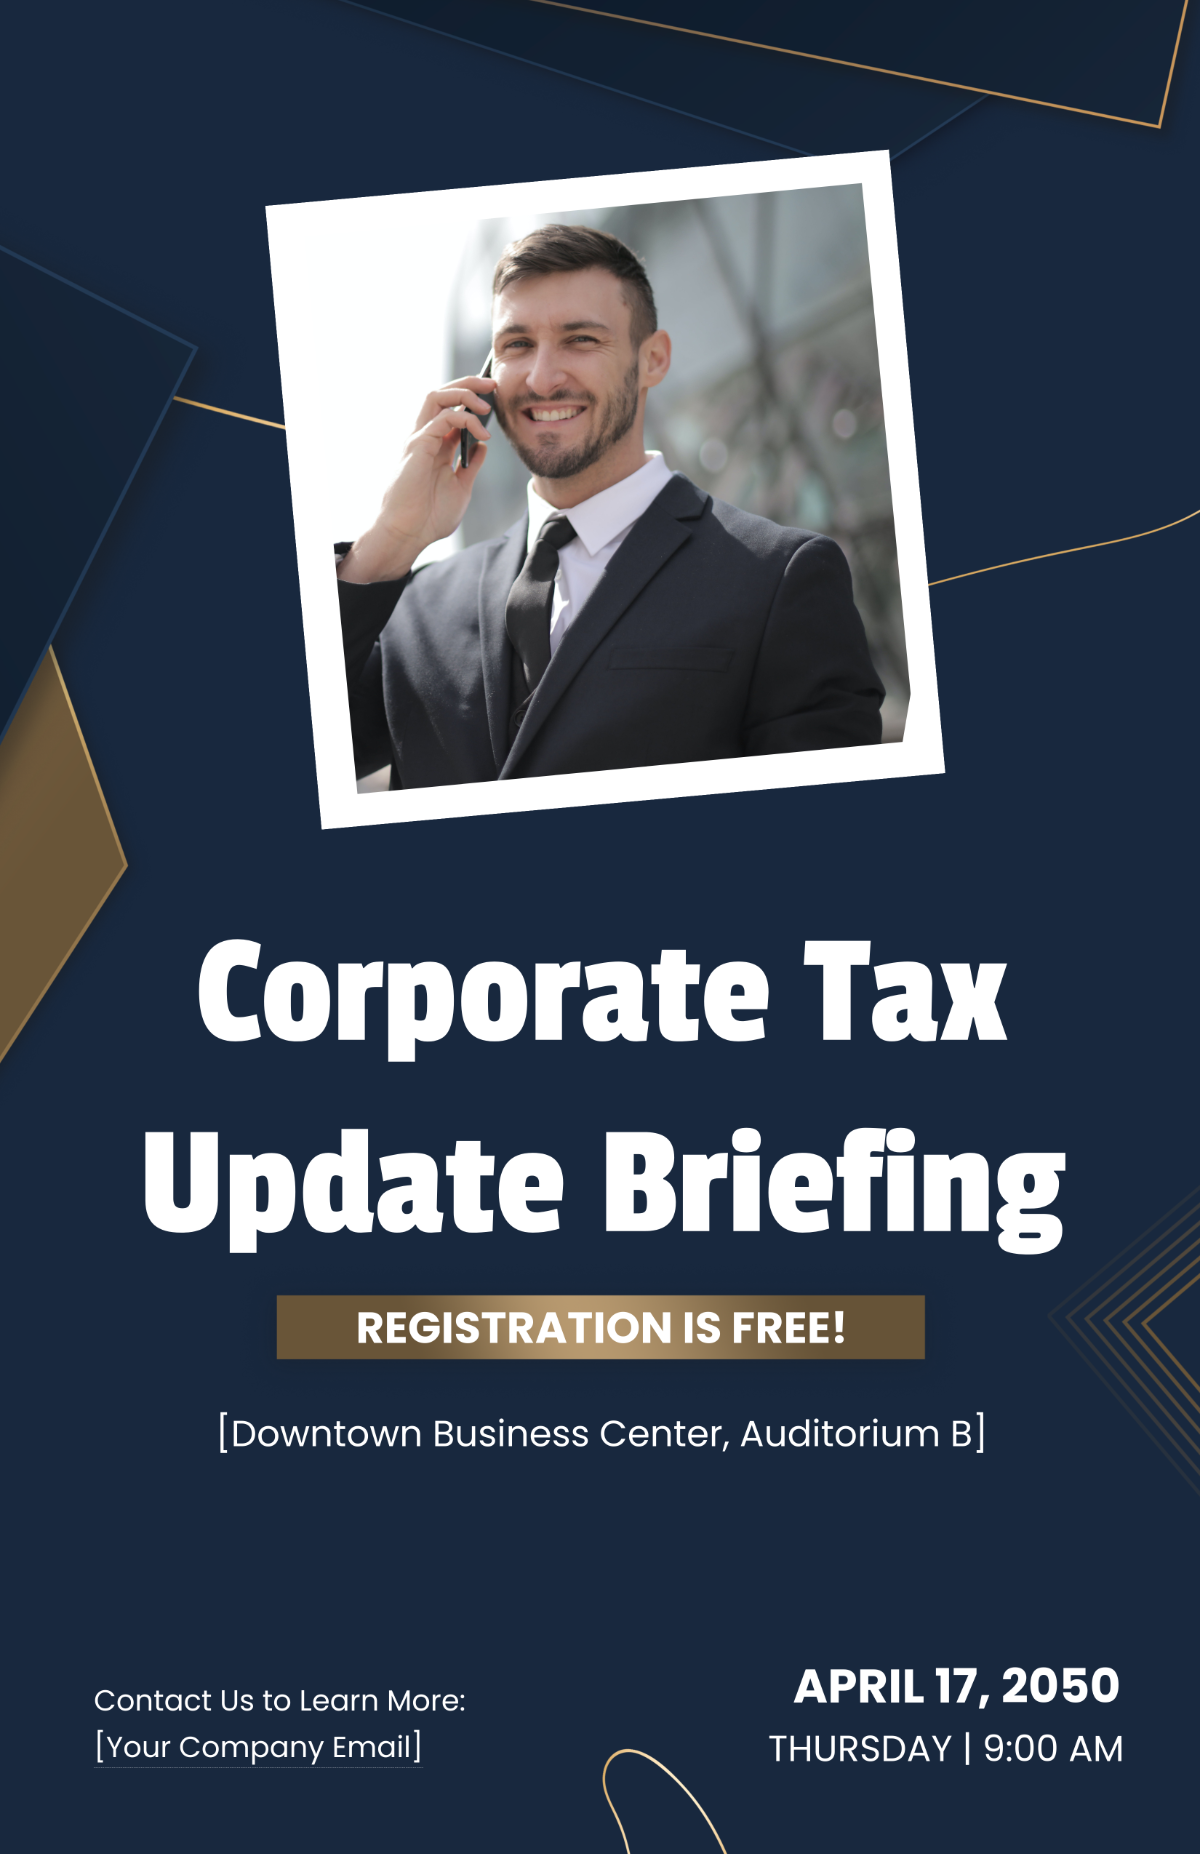 Corporate Tax Update Briefing Poster Template